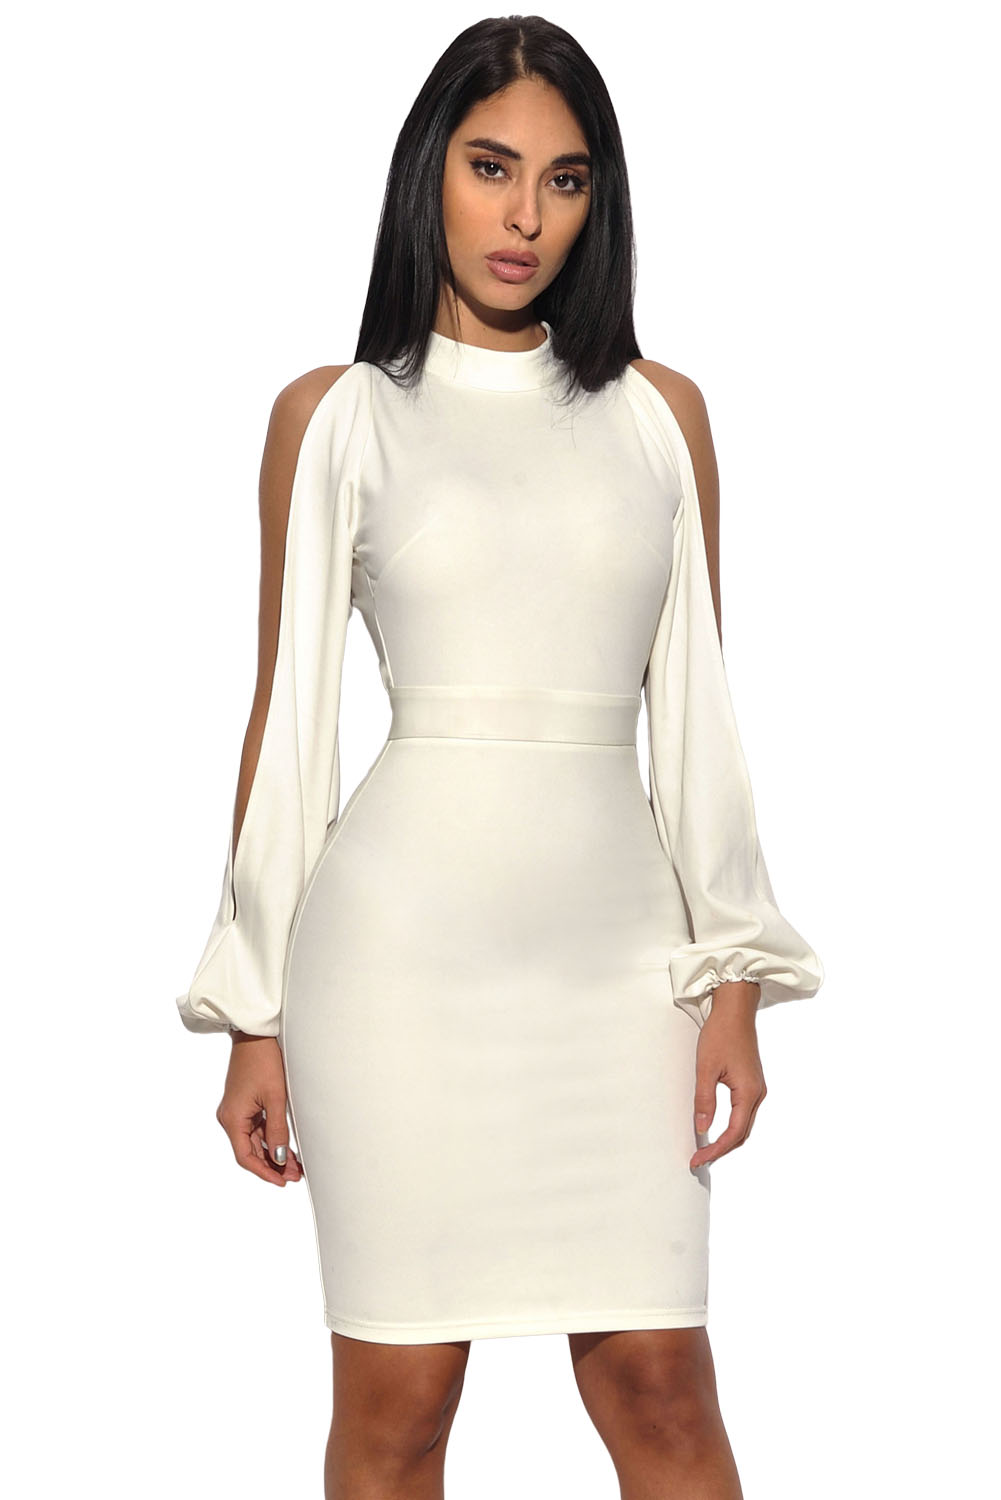 BY28466-1 White Cut Out Sleeve Stretch Crepe Bandage Party Dress